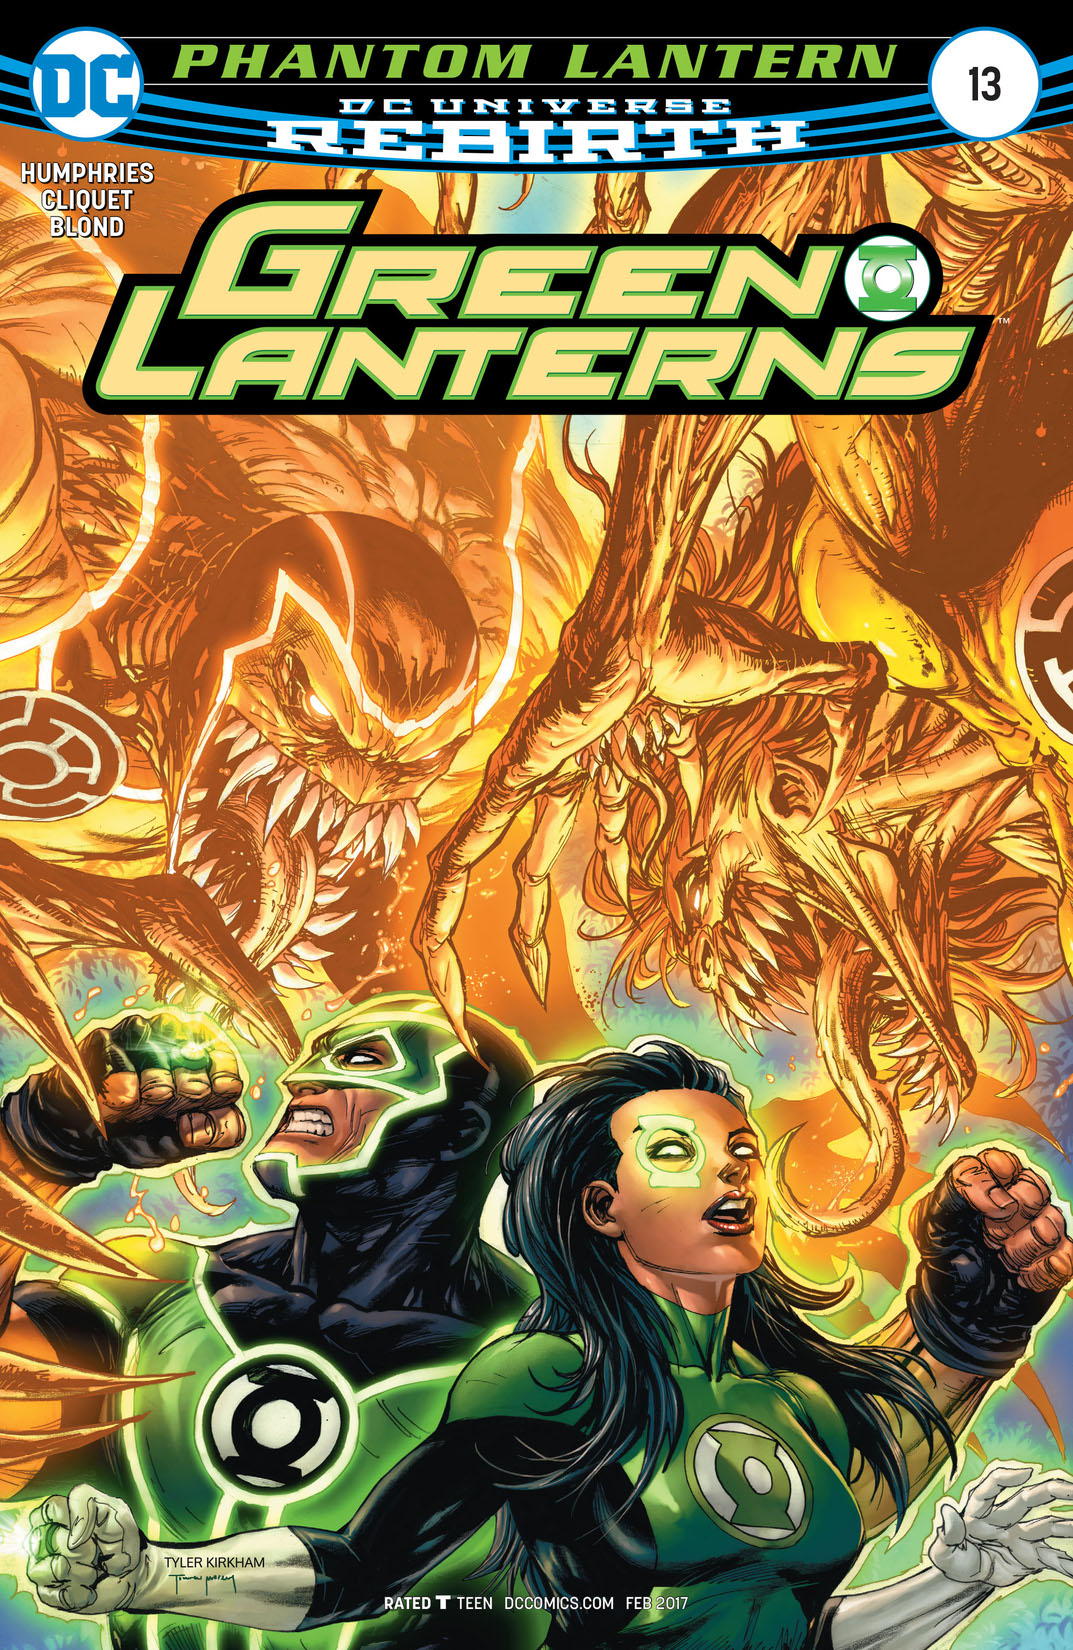 Green Lanterns #13 preview images